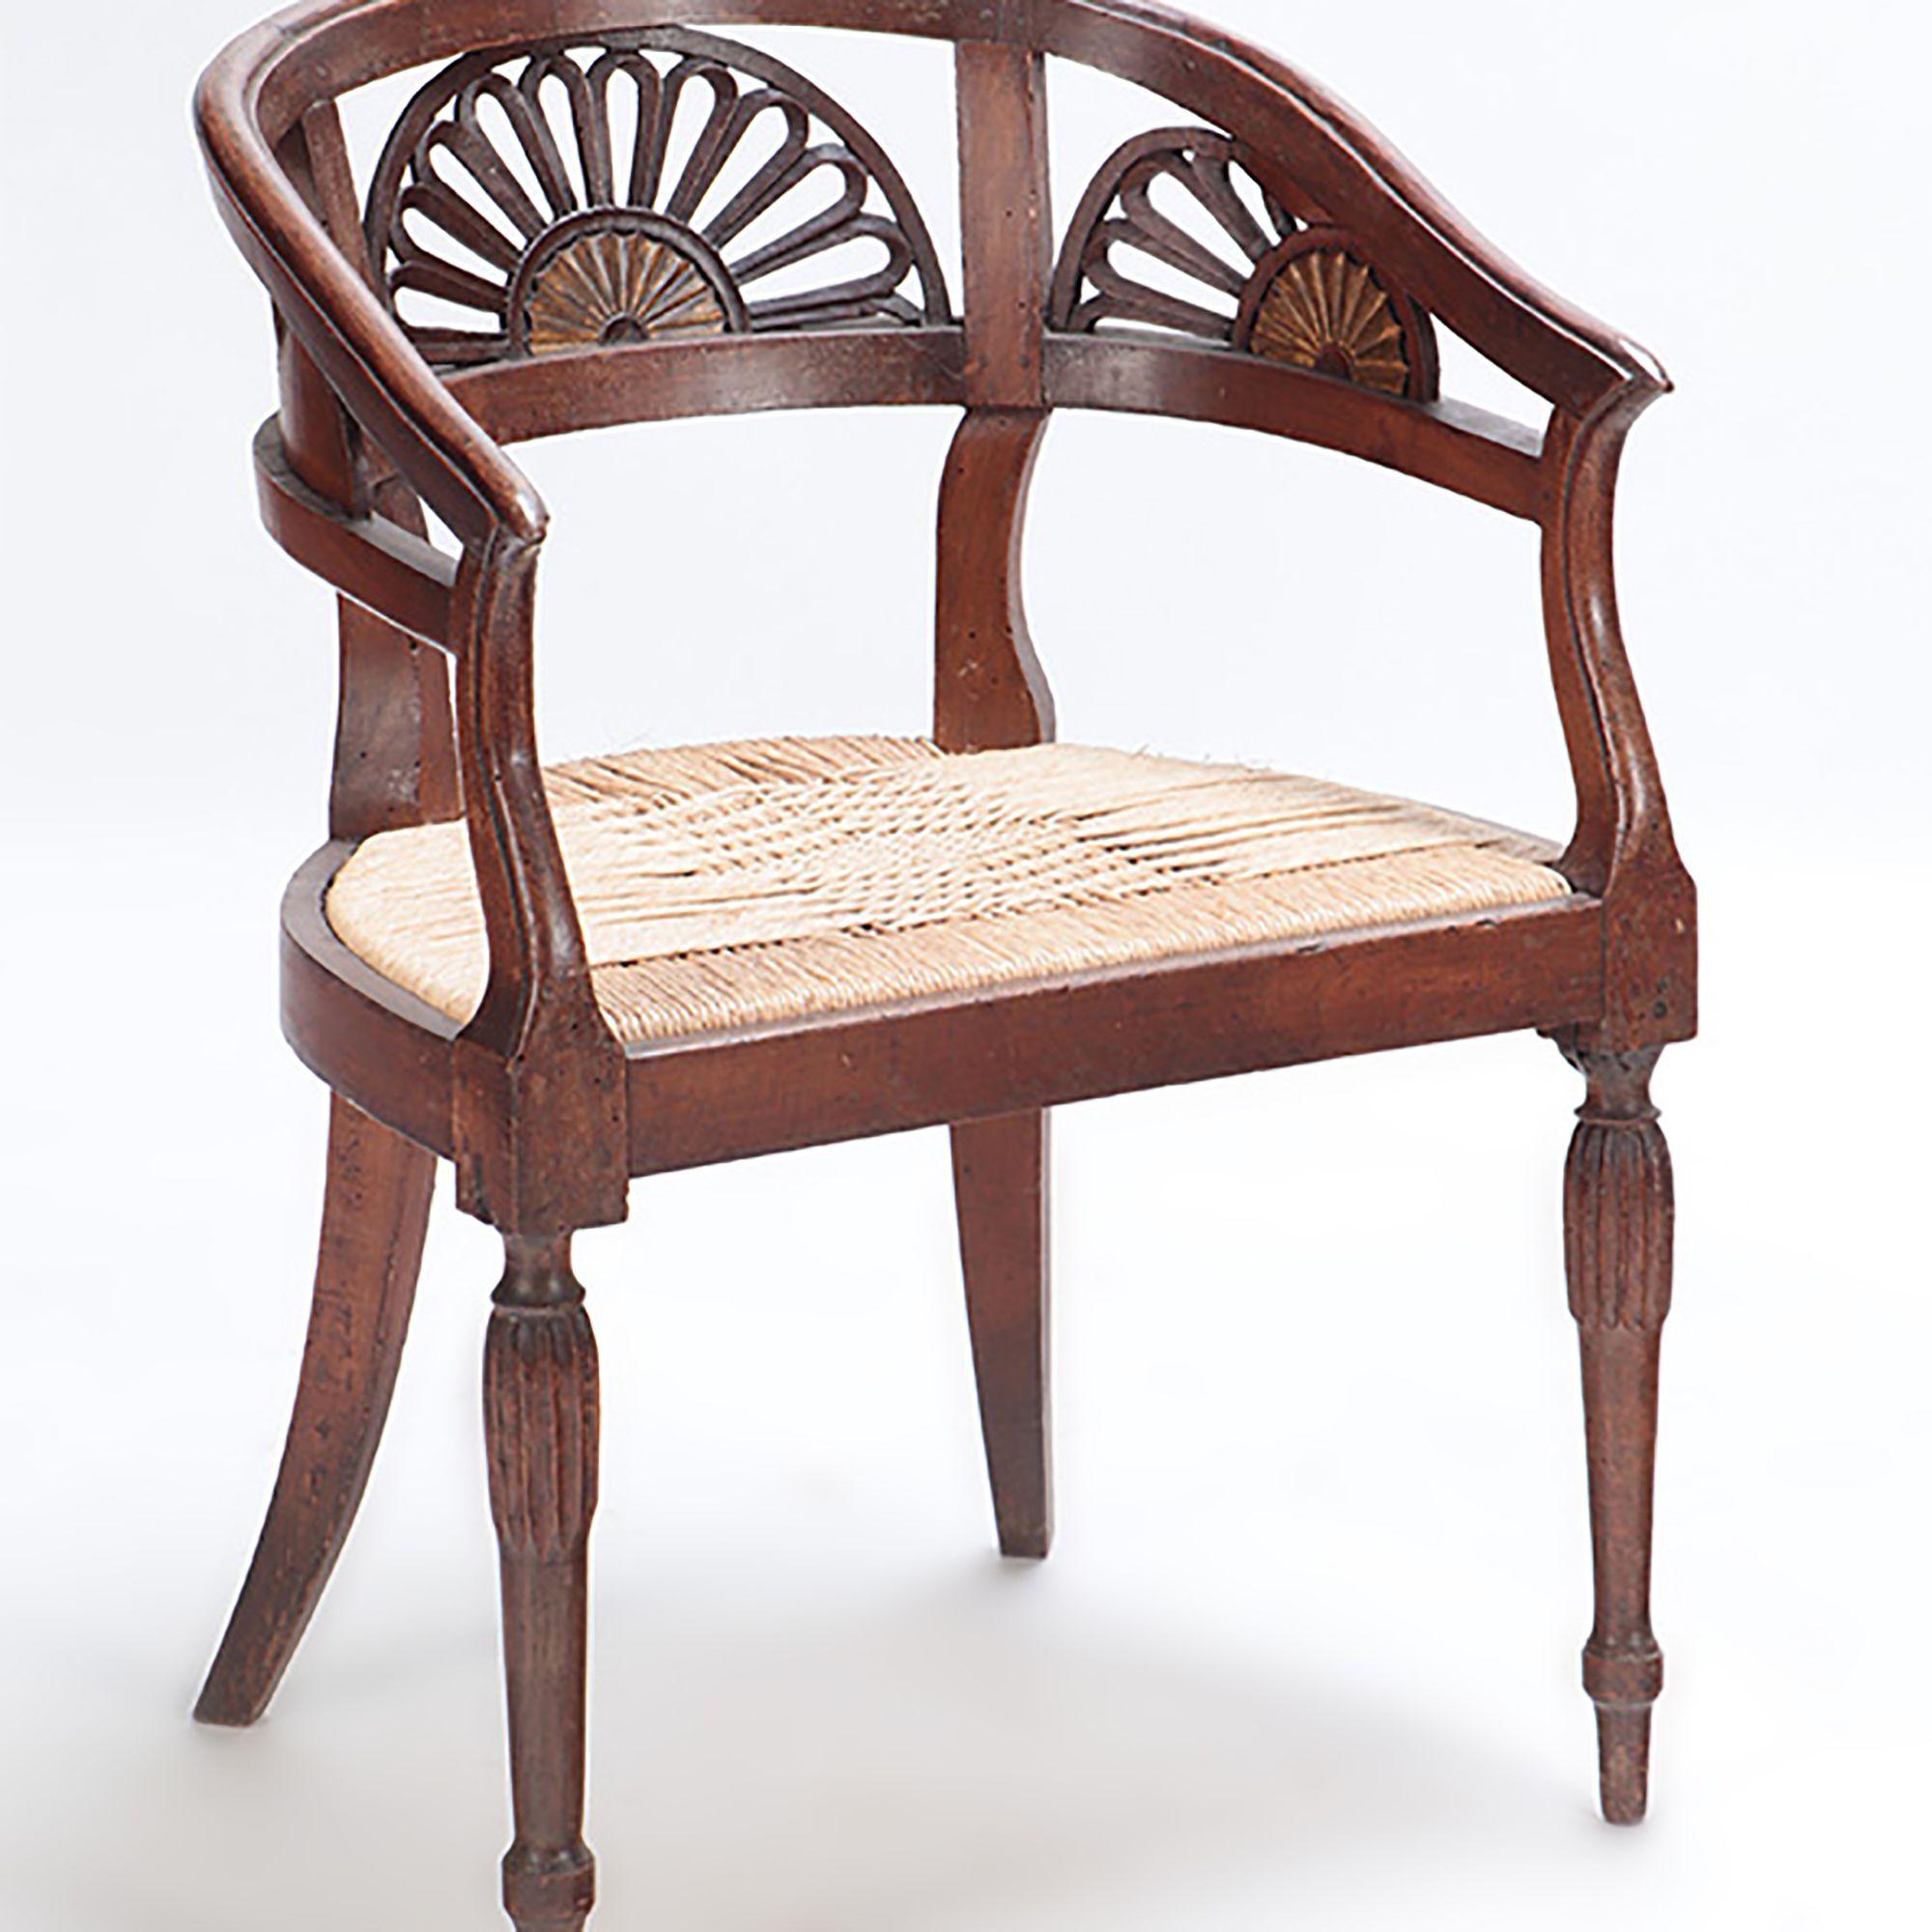 A Pair of Italian walnut open arm chairs with cord seats and cut out design, circa 1800.